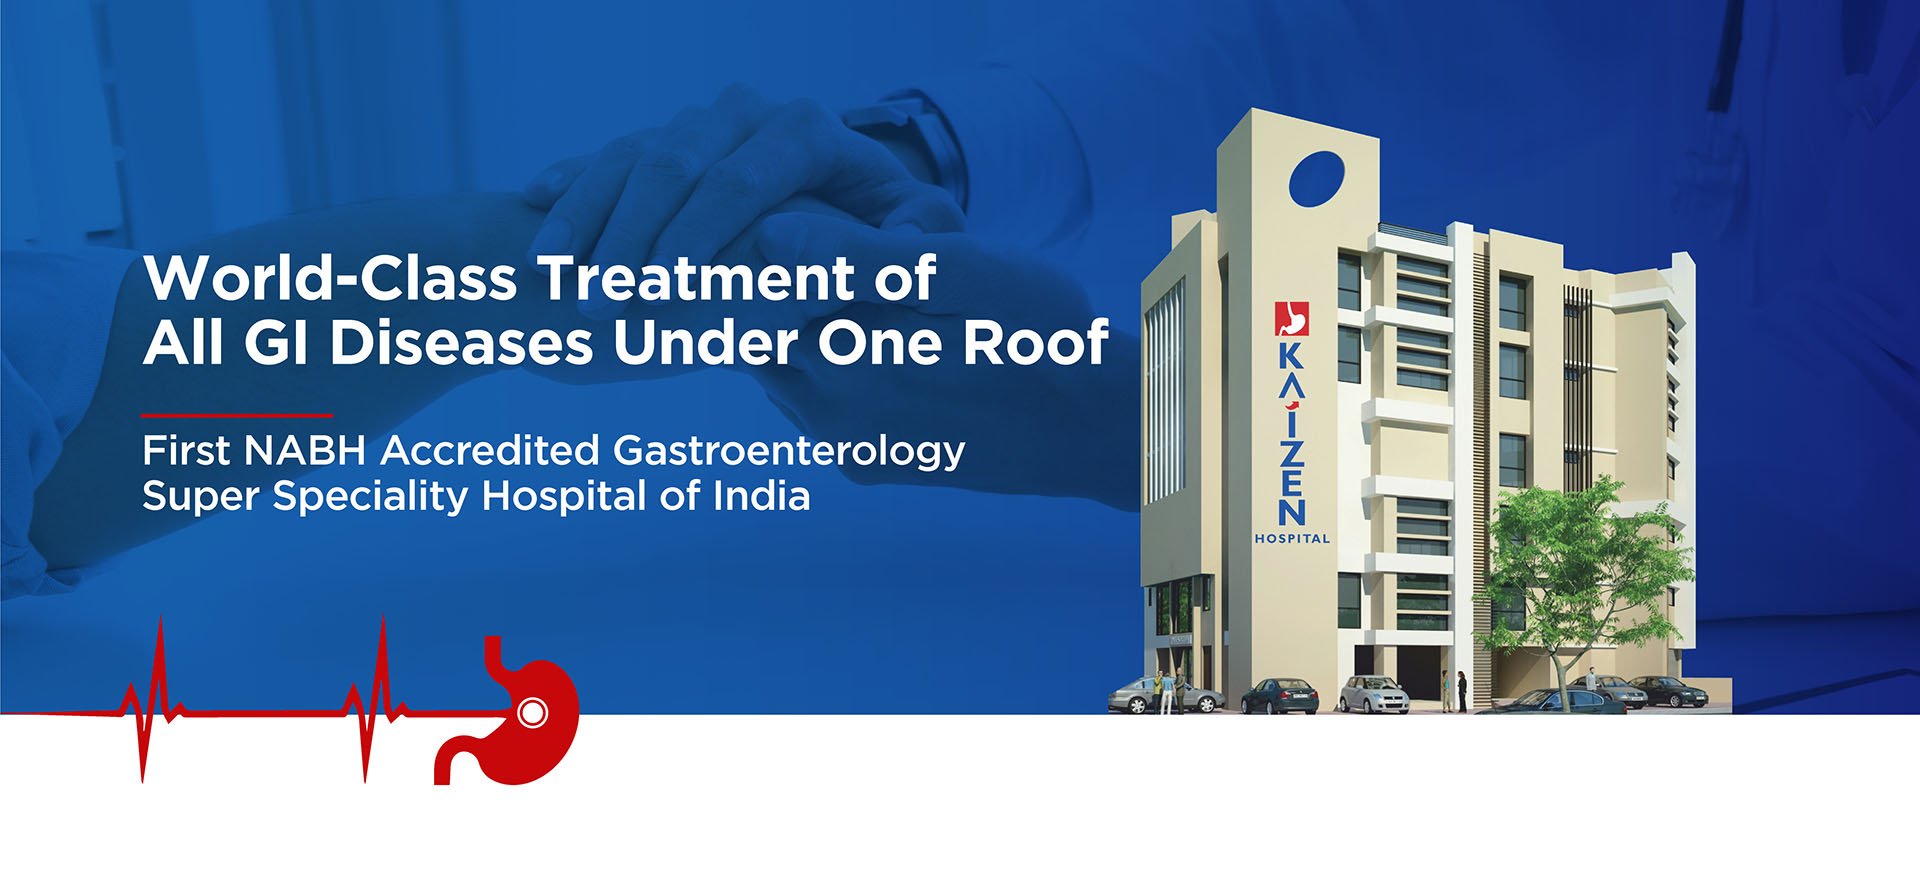 Best Gastroenterology Hospital In Ahmedabad, Gujarat, India picture image